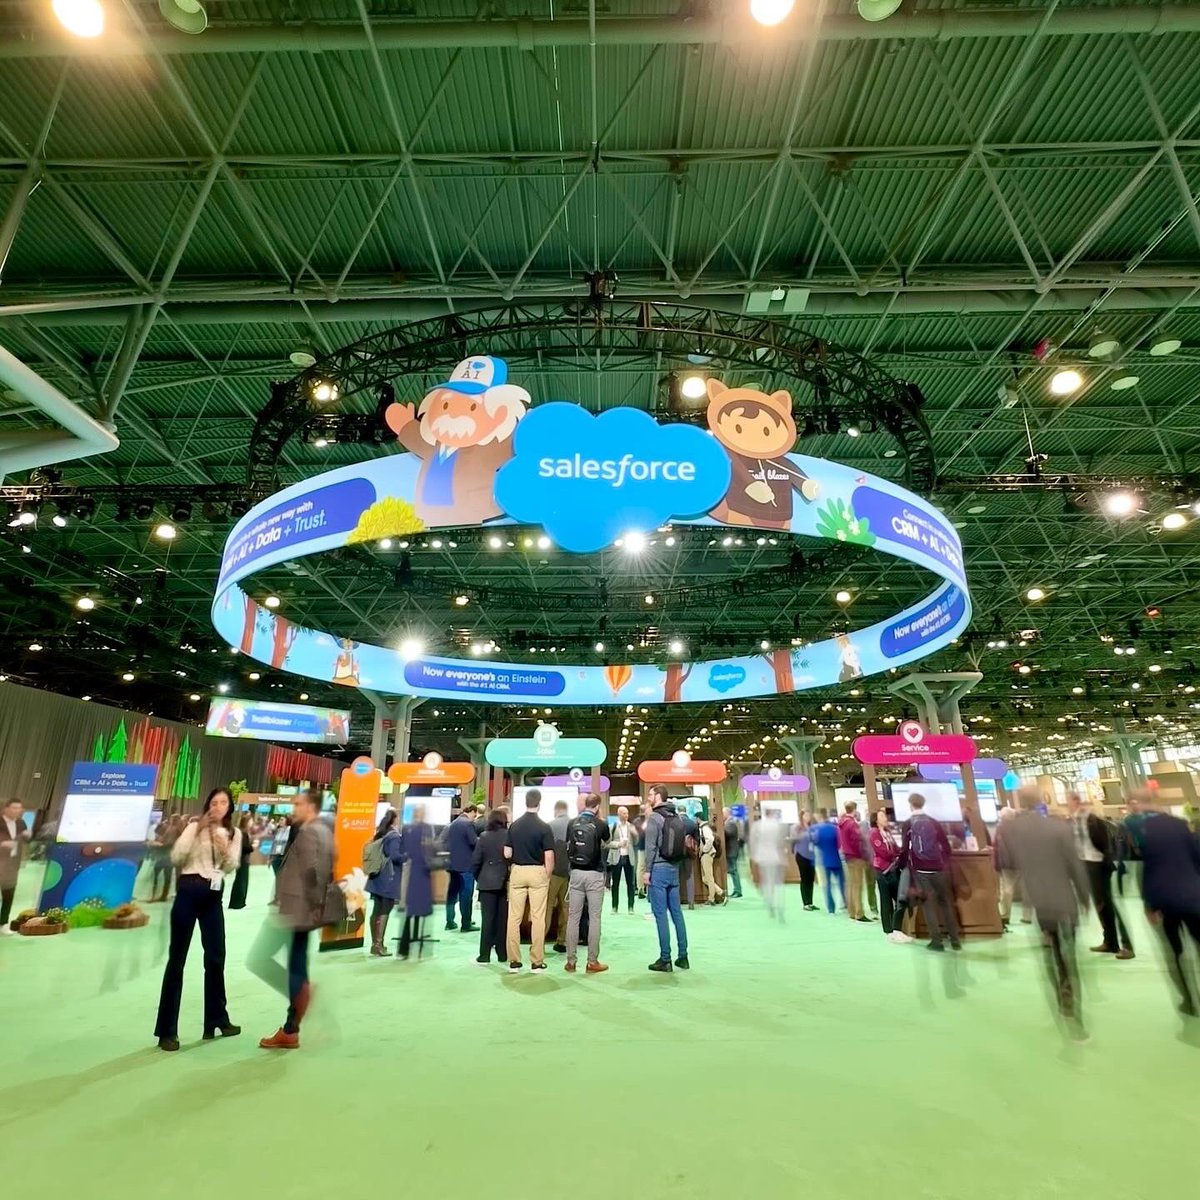 Goooood morning, New York! #SalesforceTour NYC is here, and we've got a whole host of inspiring and informative items on the docket at The Slack Experience. Here are some of the highlights so far! 📸